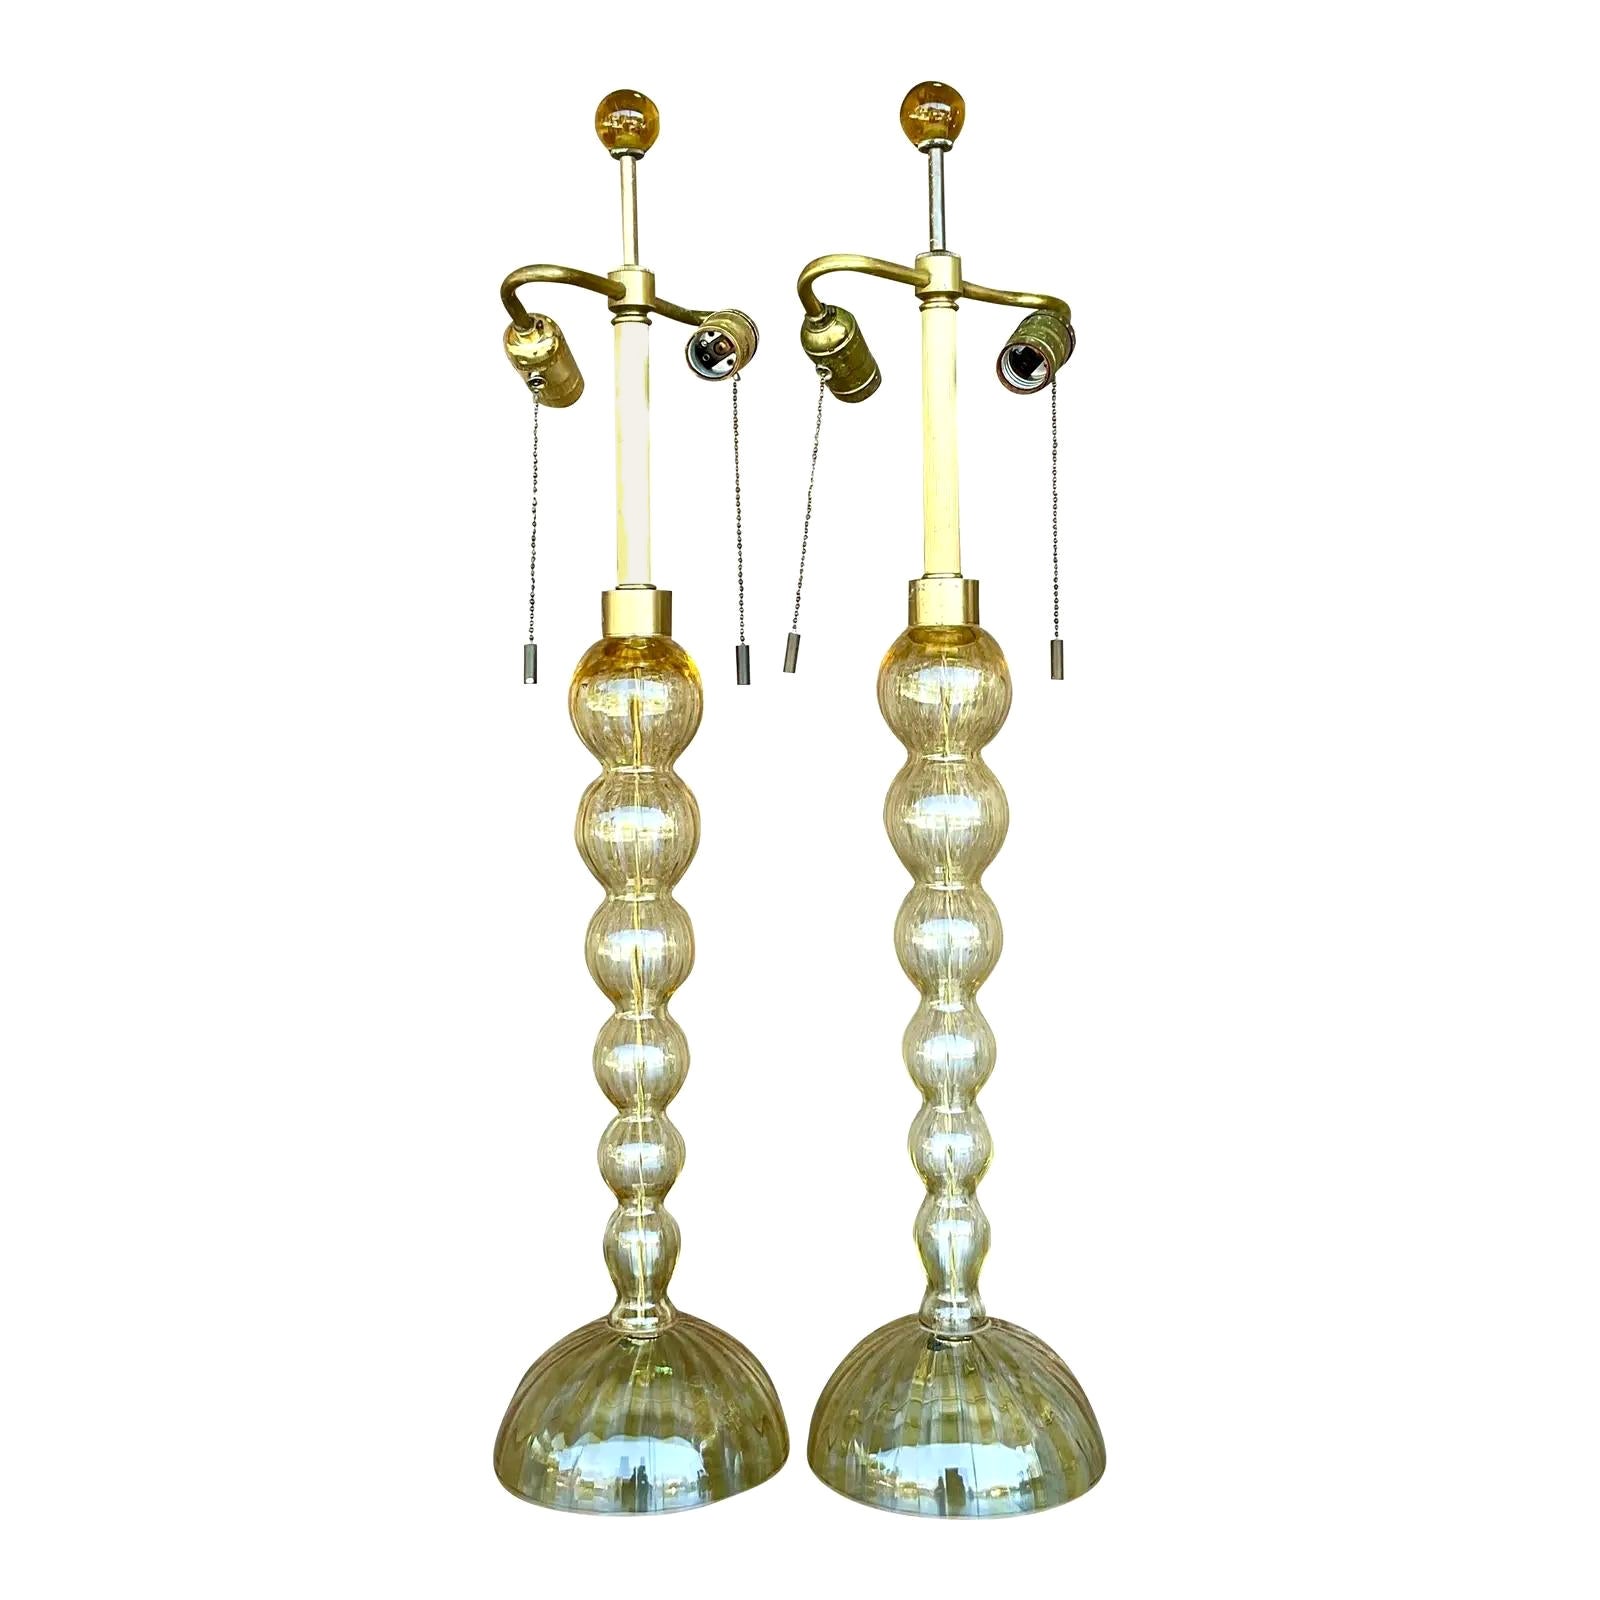 Vintage Contemporary Donghia Murano Glass Table Lamps, a Pair